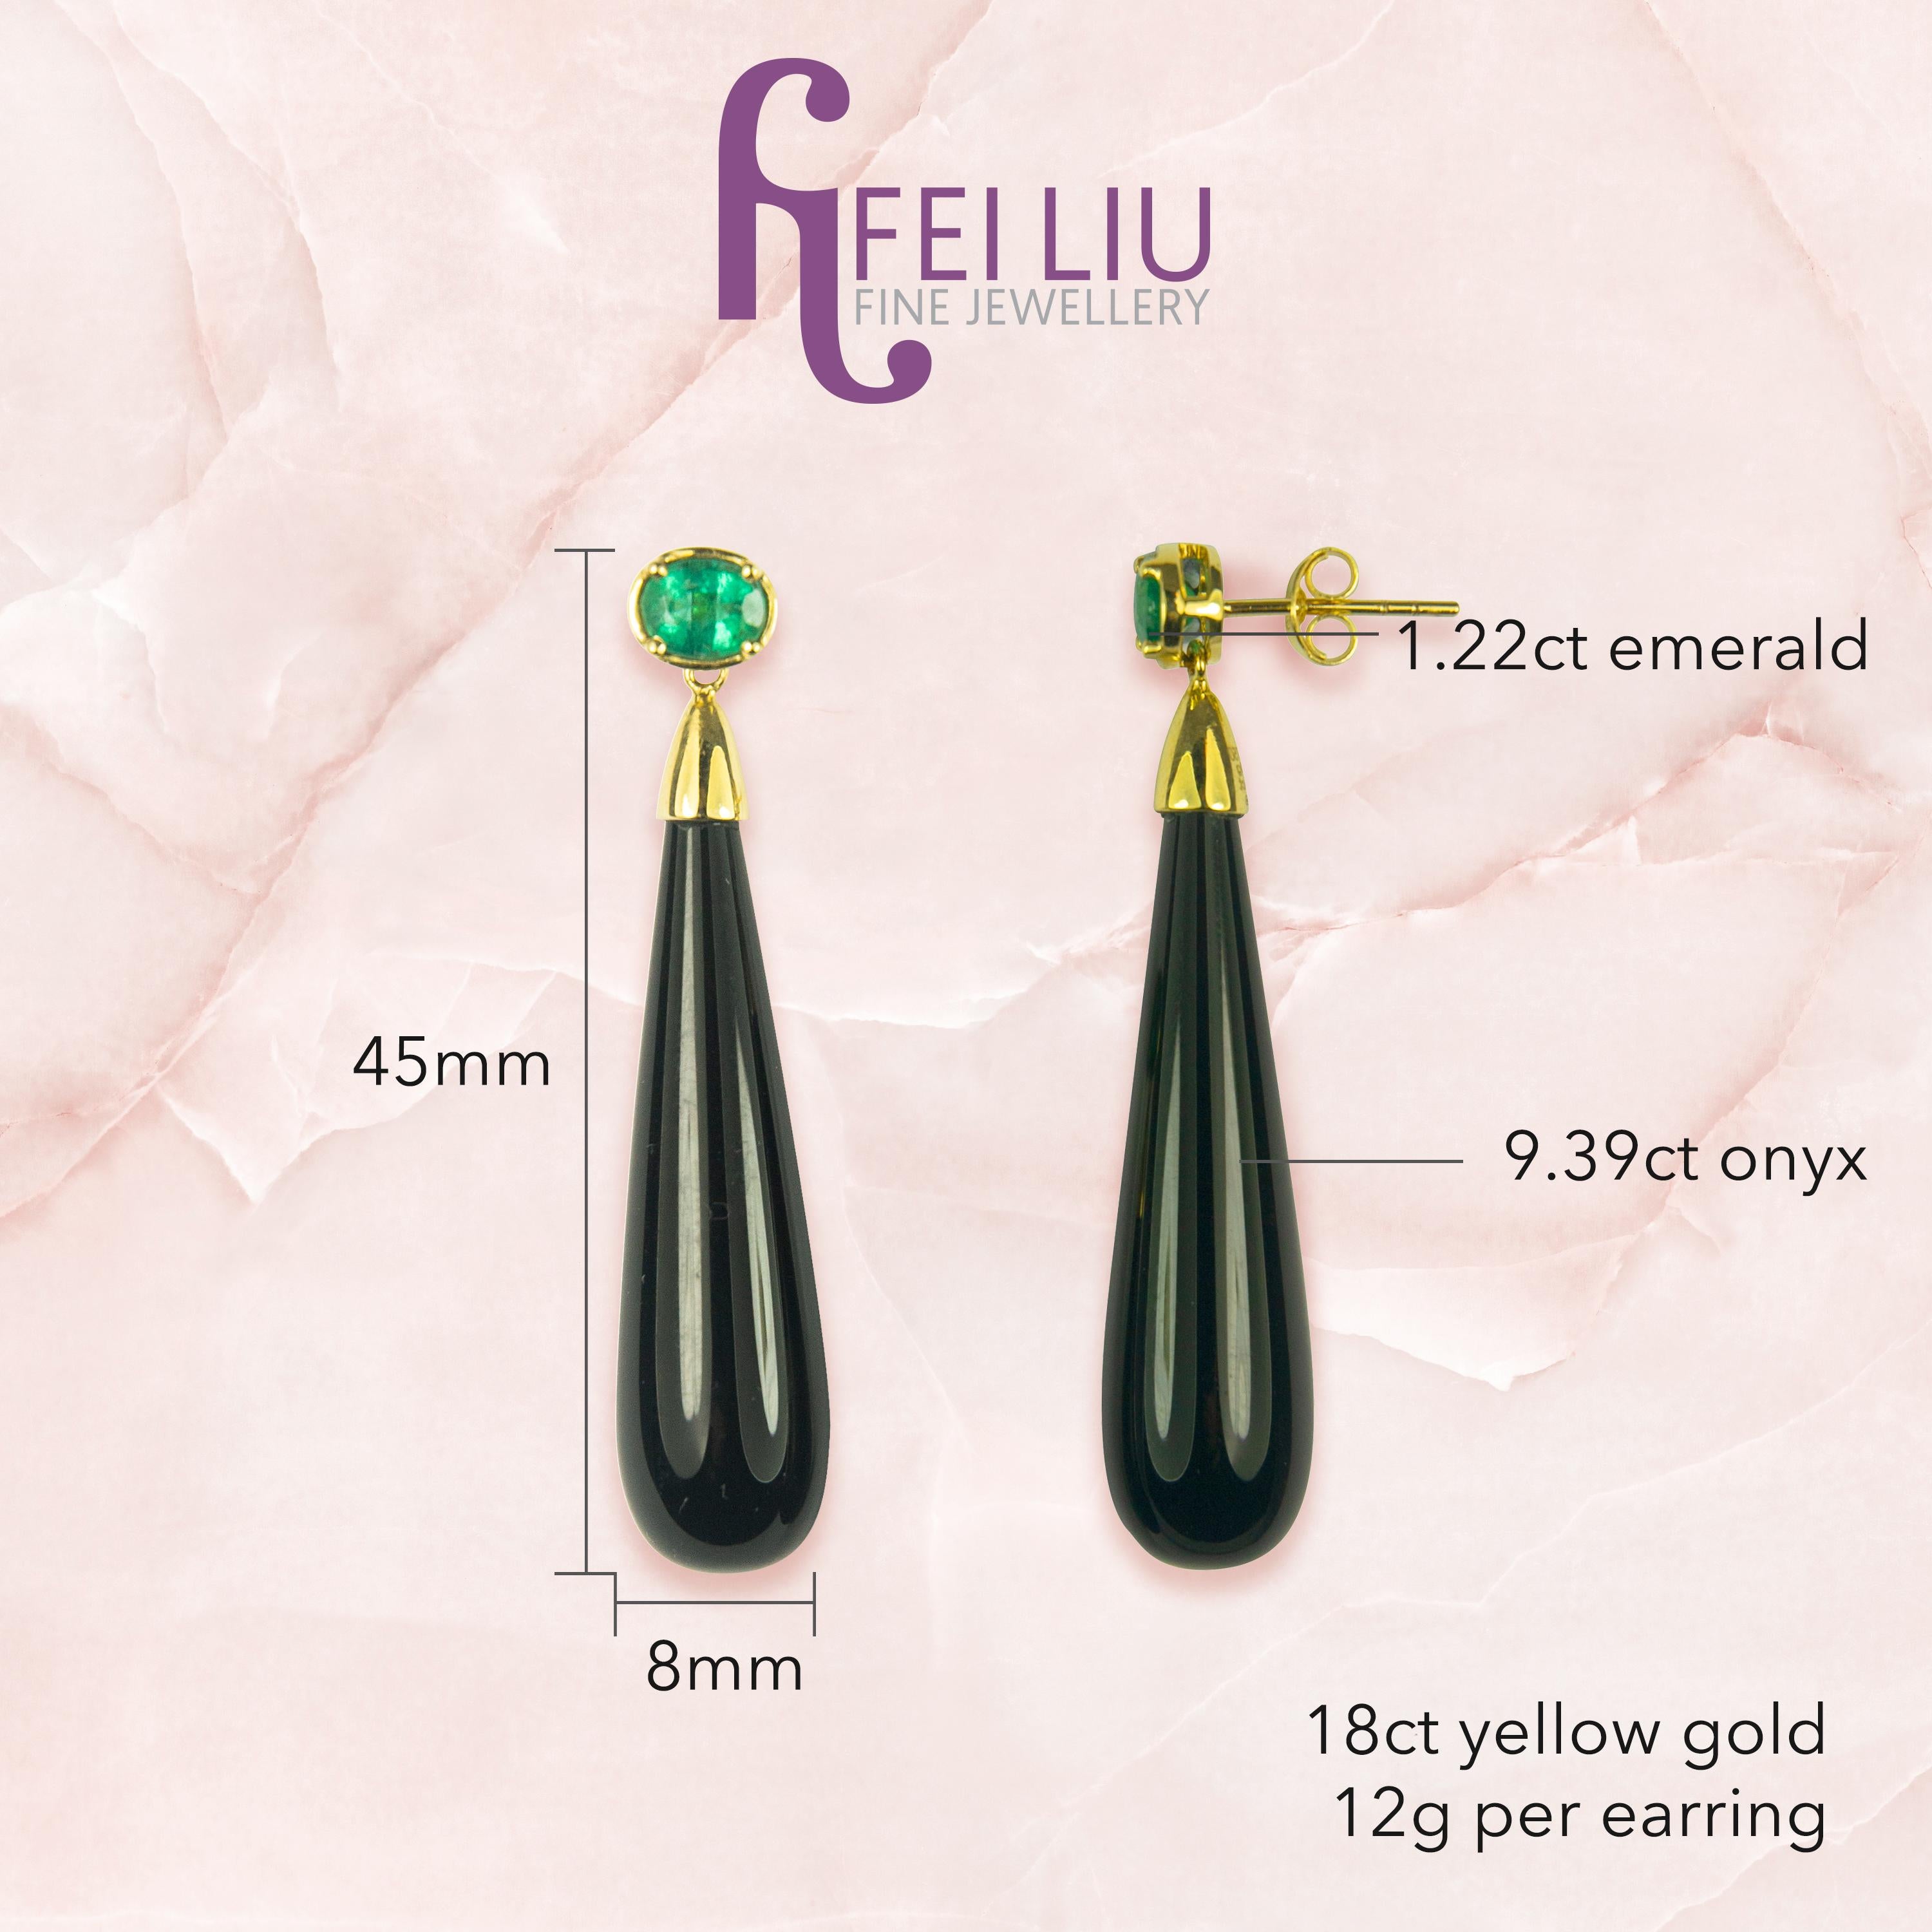 Description:
Drop earrings with 9.39ct black onyx and 1.22ct emerald, set in 18ct yellow gold.  

Inspiration:
A pair of classic and bold drop earrings to take you through any special occasion. The organic onyx coupled with the vivid emerald gives a